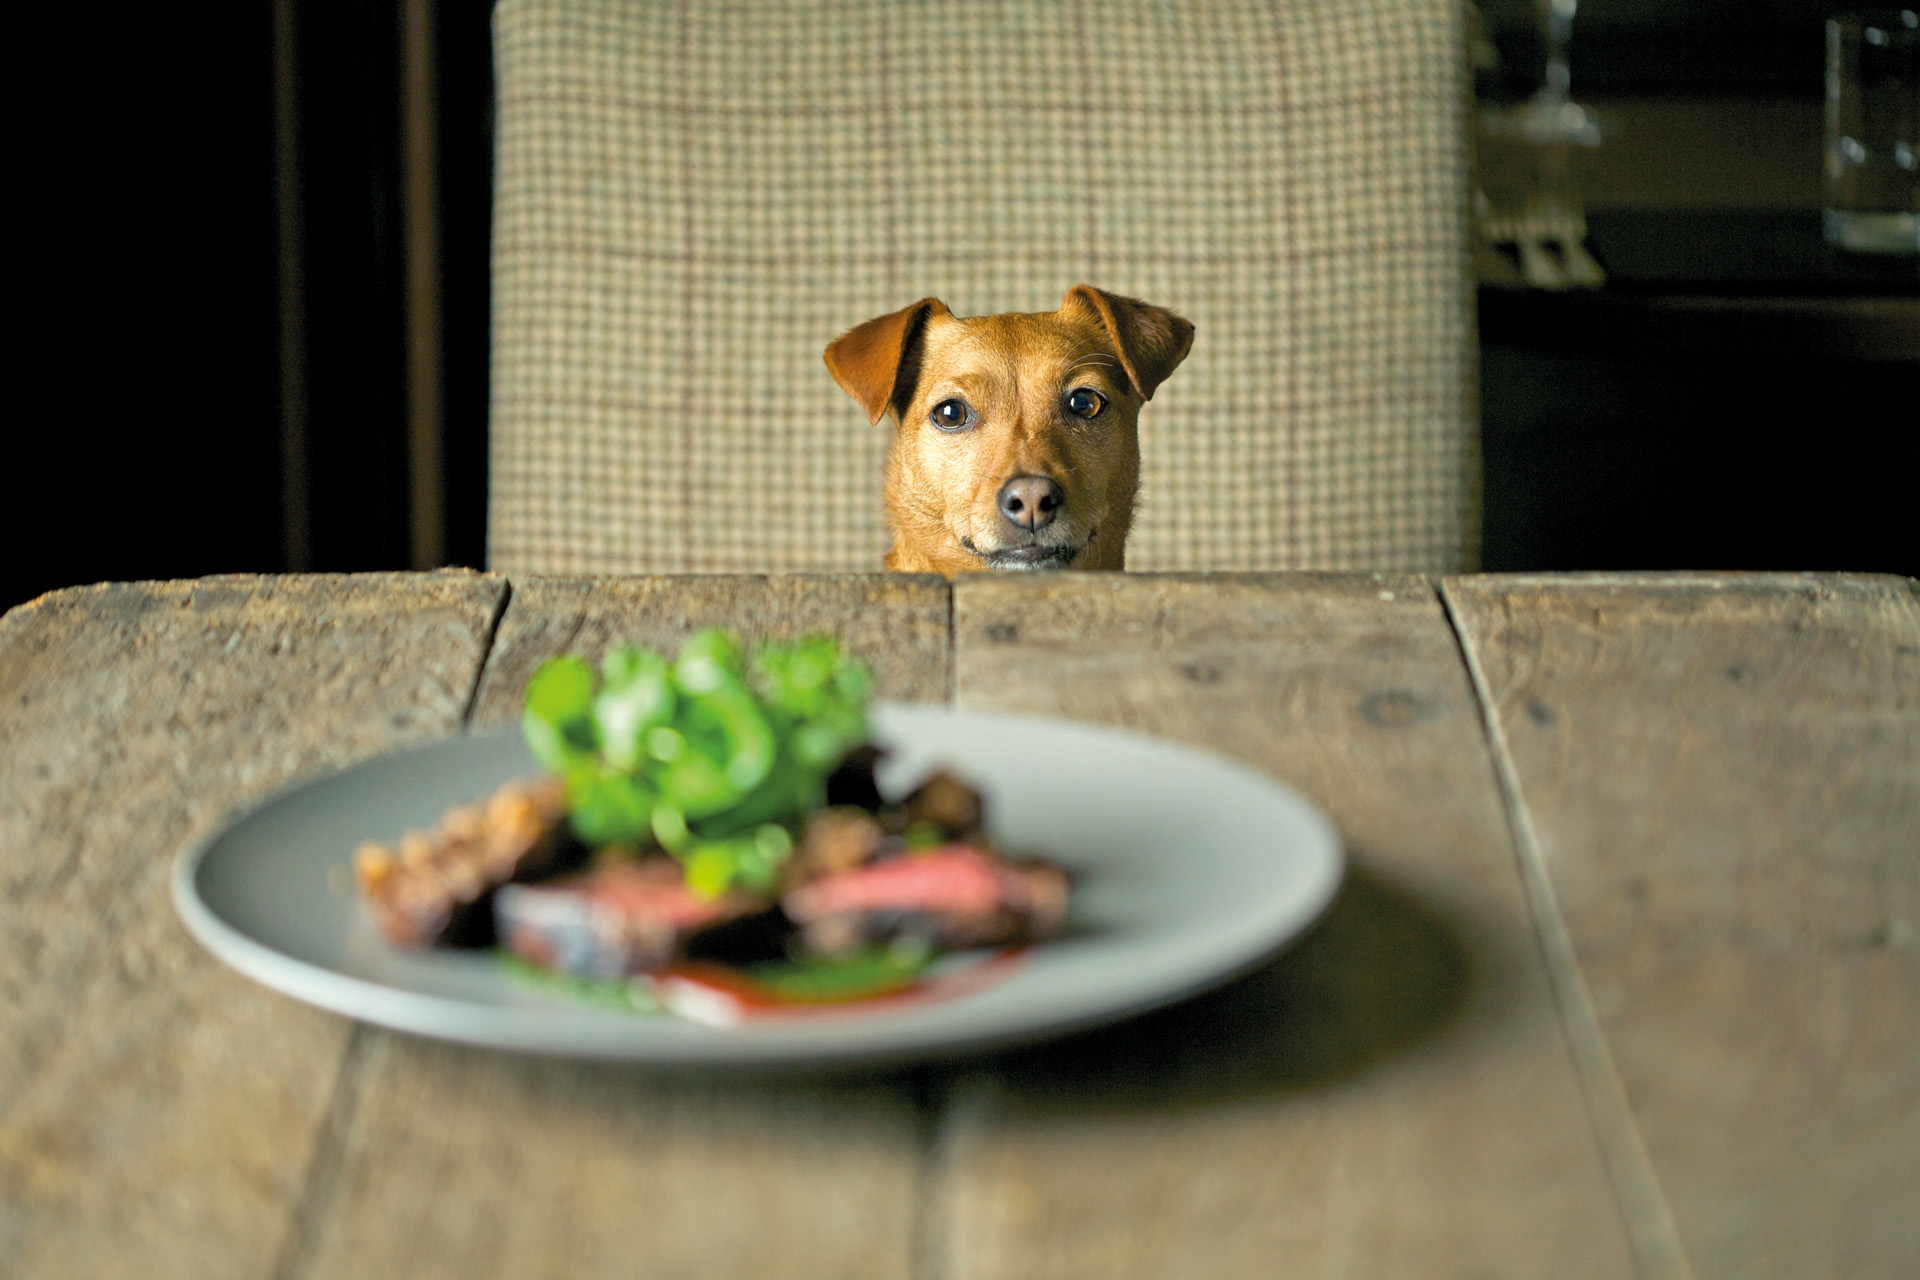 A dog looking at a plate of food